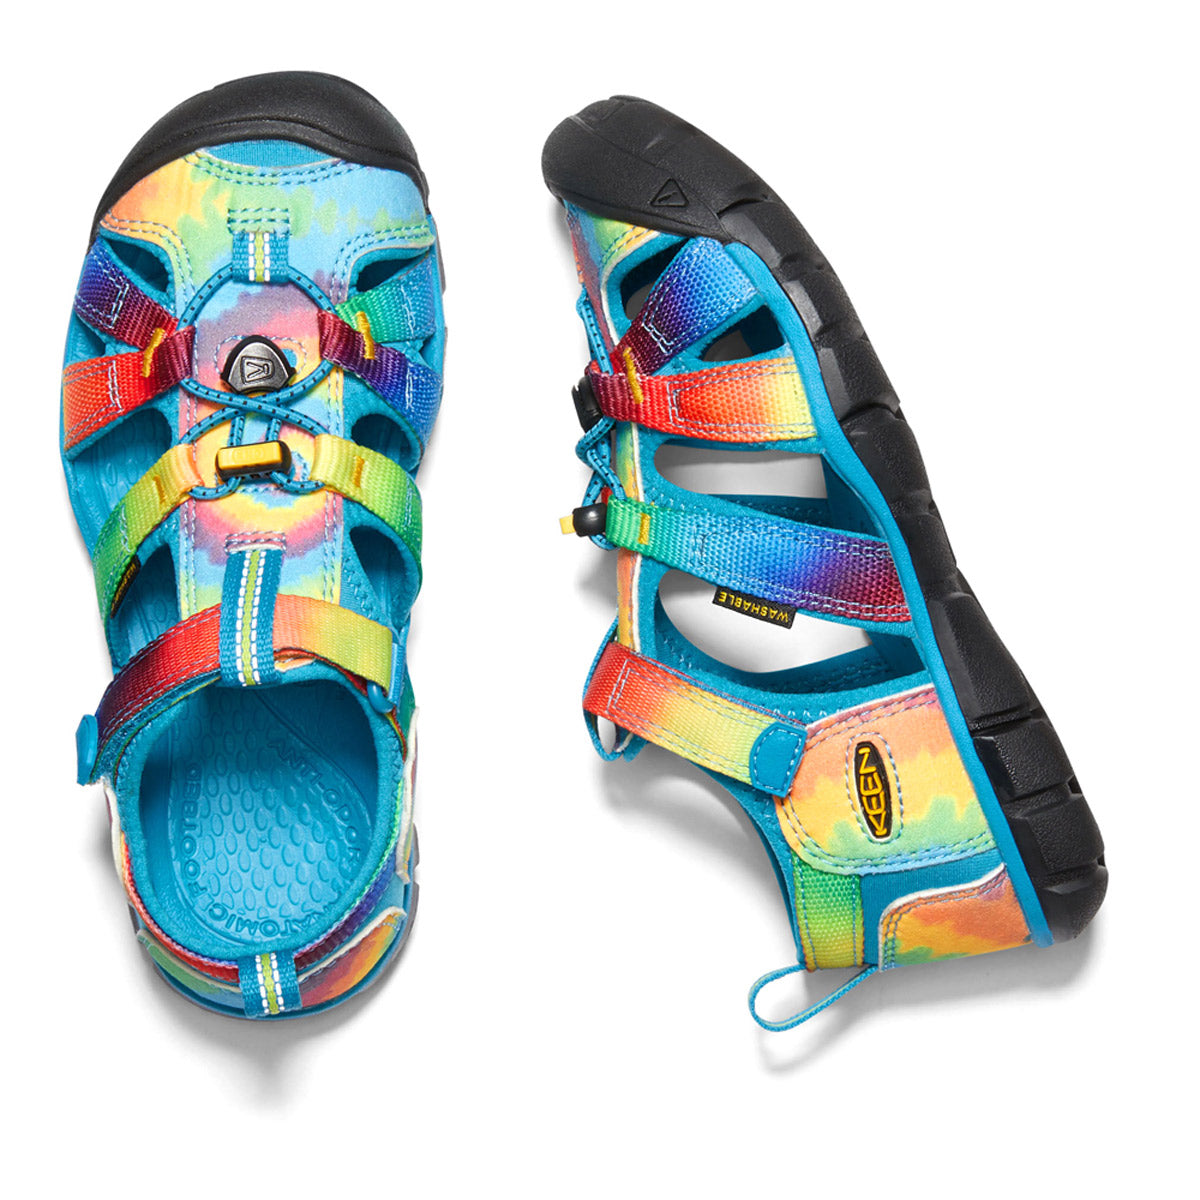 A pair of colorful Keen CHILD SEACAMP II CNX VIVID BLUE TIE DYE sandals with a closed-loop Secure Fit Lace Capture System on a white background.